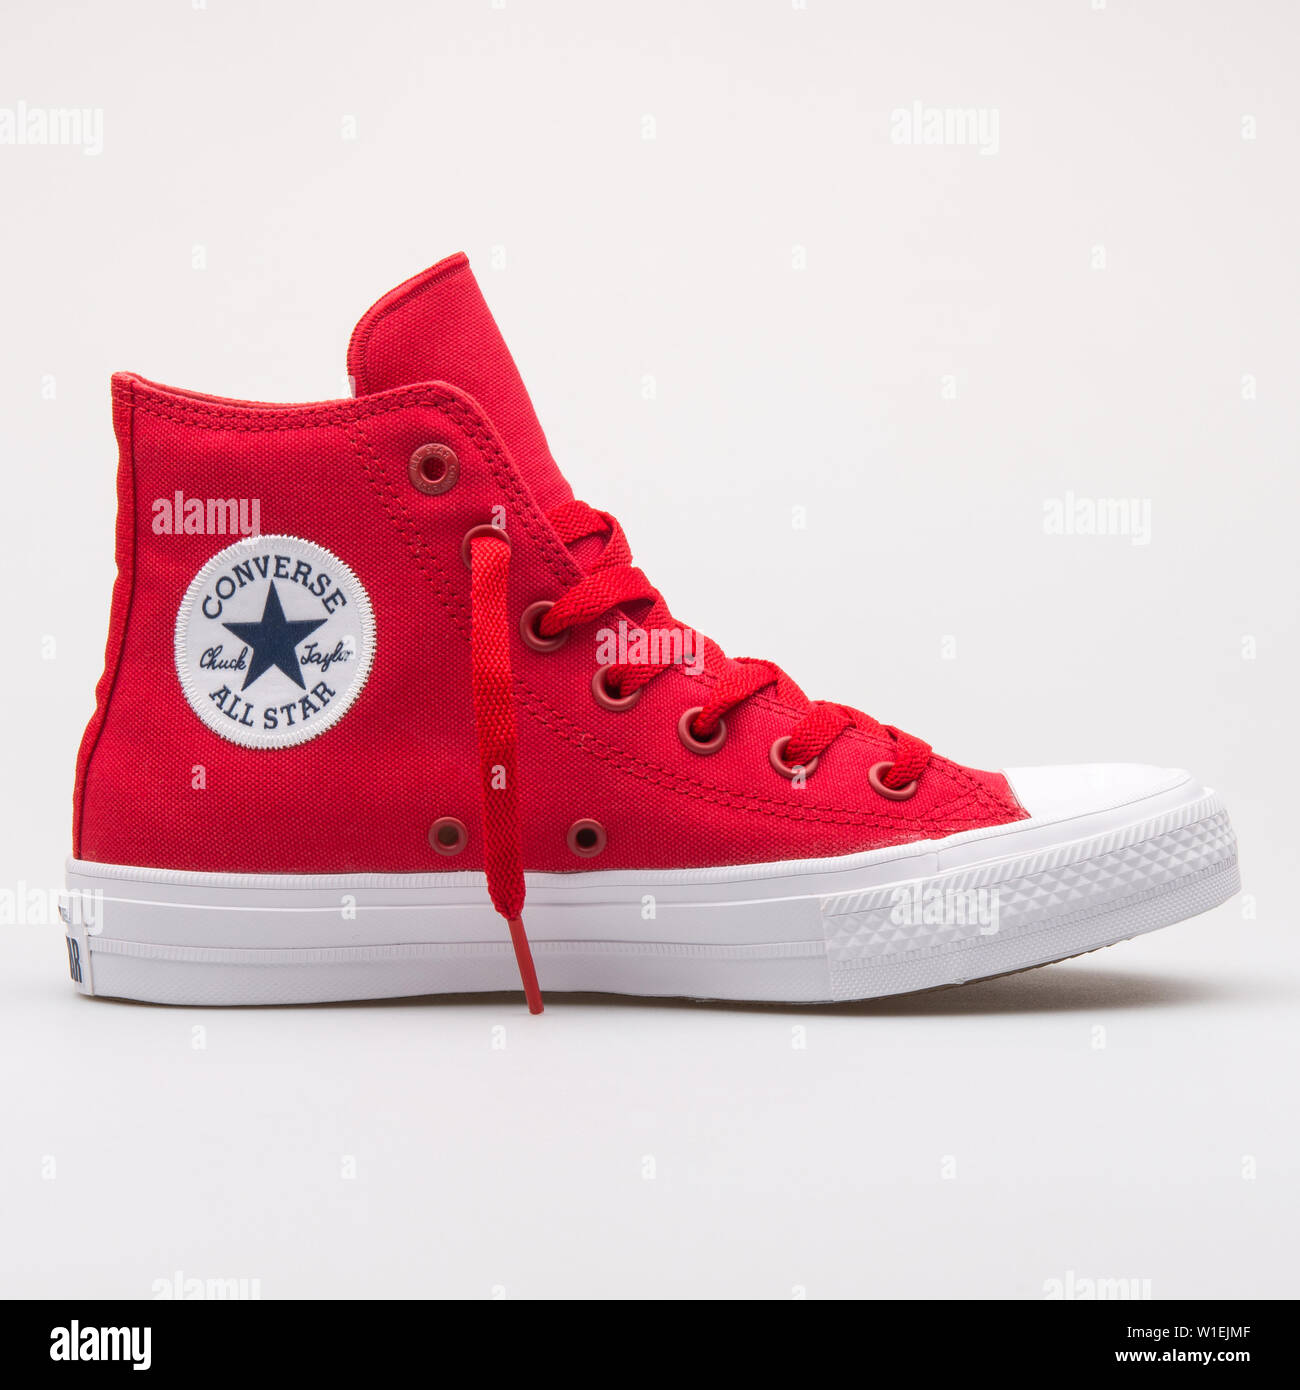 VIENNA, AUSTRIA - AUGUST 23, 2017: Converse Chuck Taylor All Star 2 High  red sneaker on white background Stock Photo - Alamy